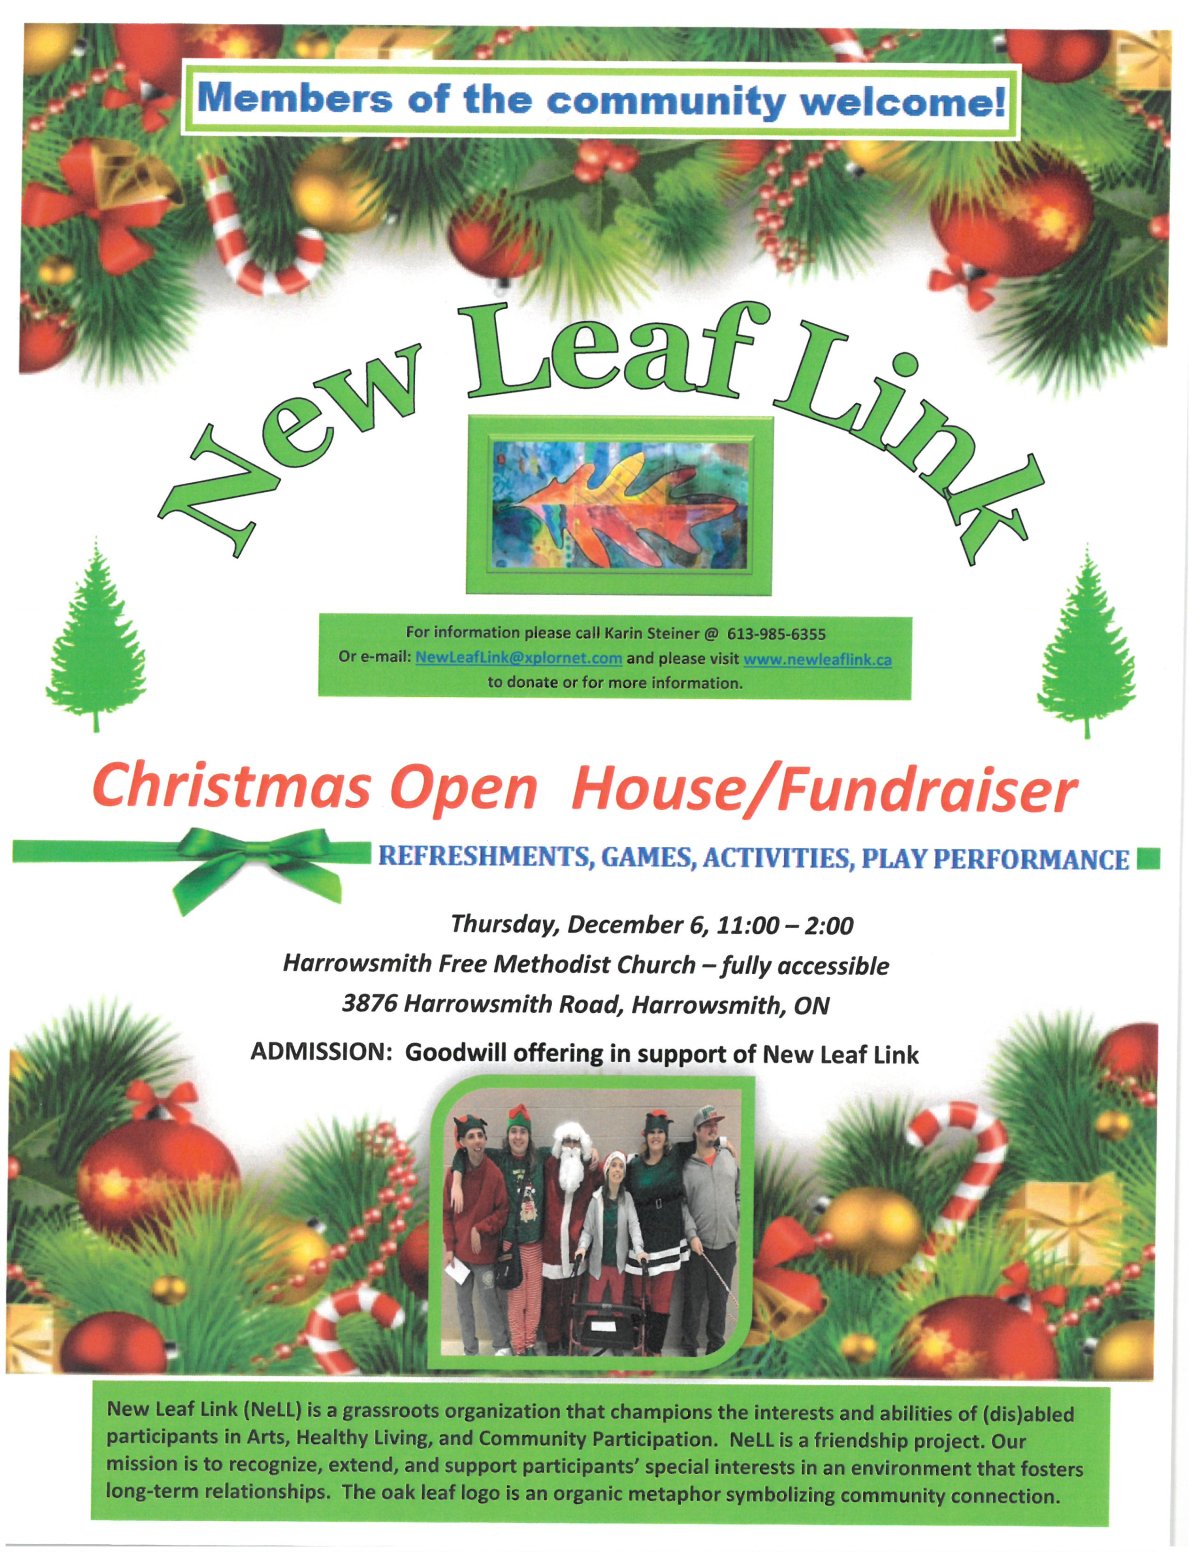 New Leaf Link Christmas Open House/Fundraiser - image